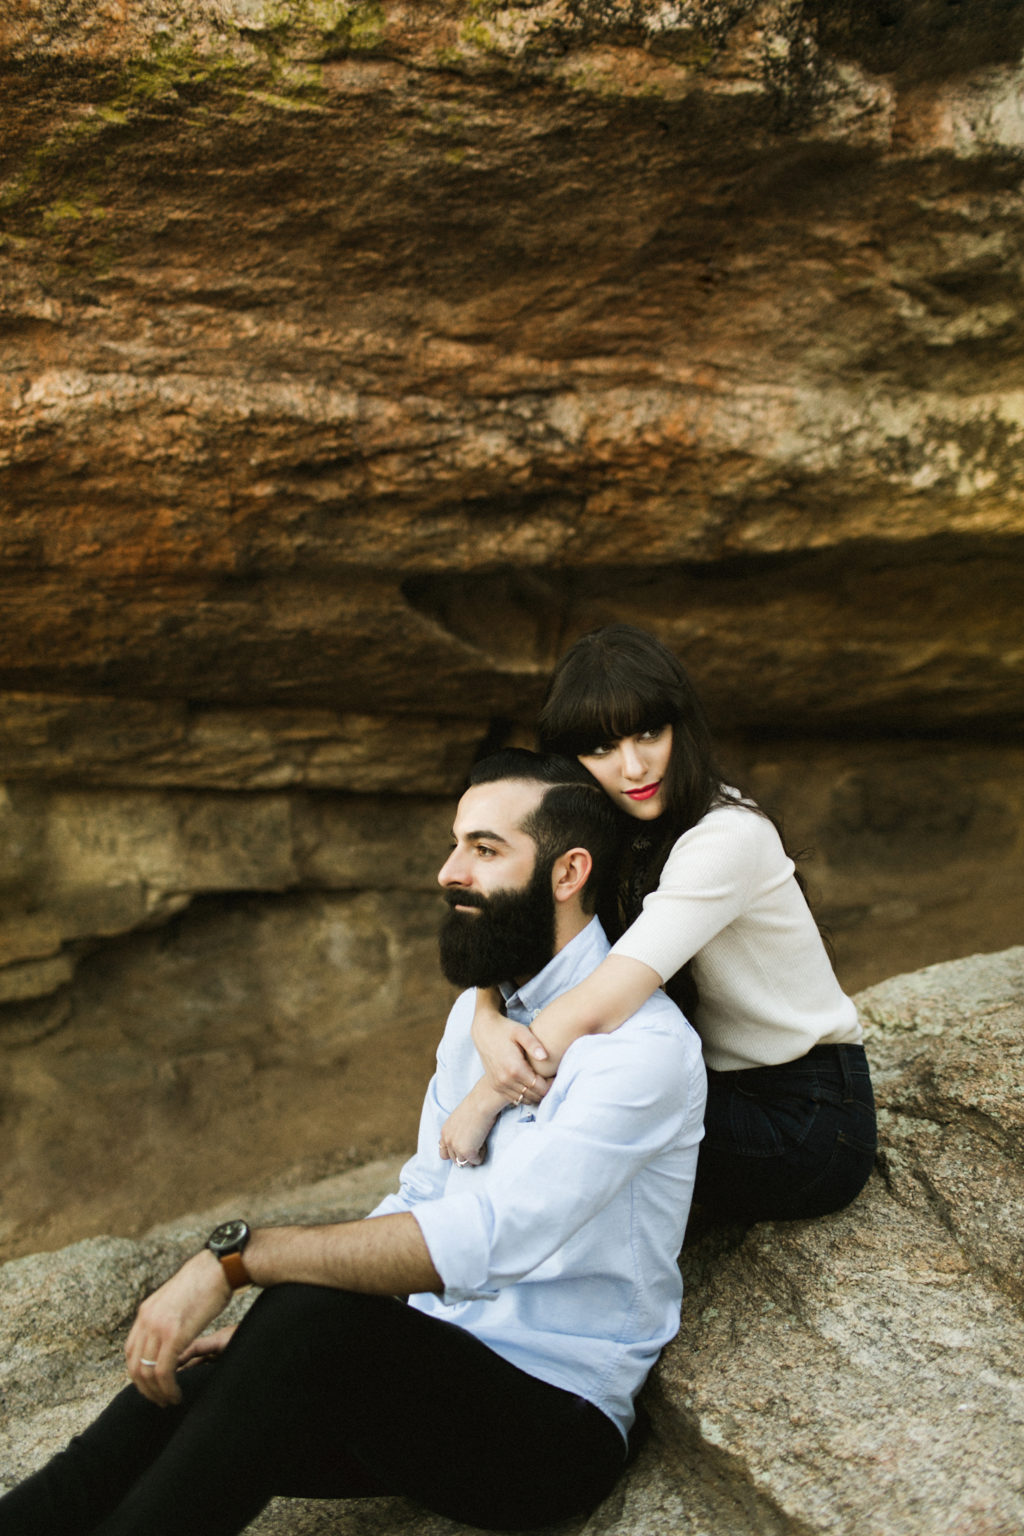 New Darlings - Windy Couples shoot by Ben Sasso